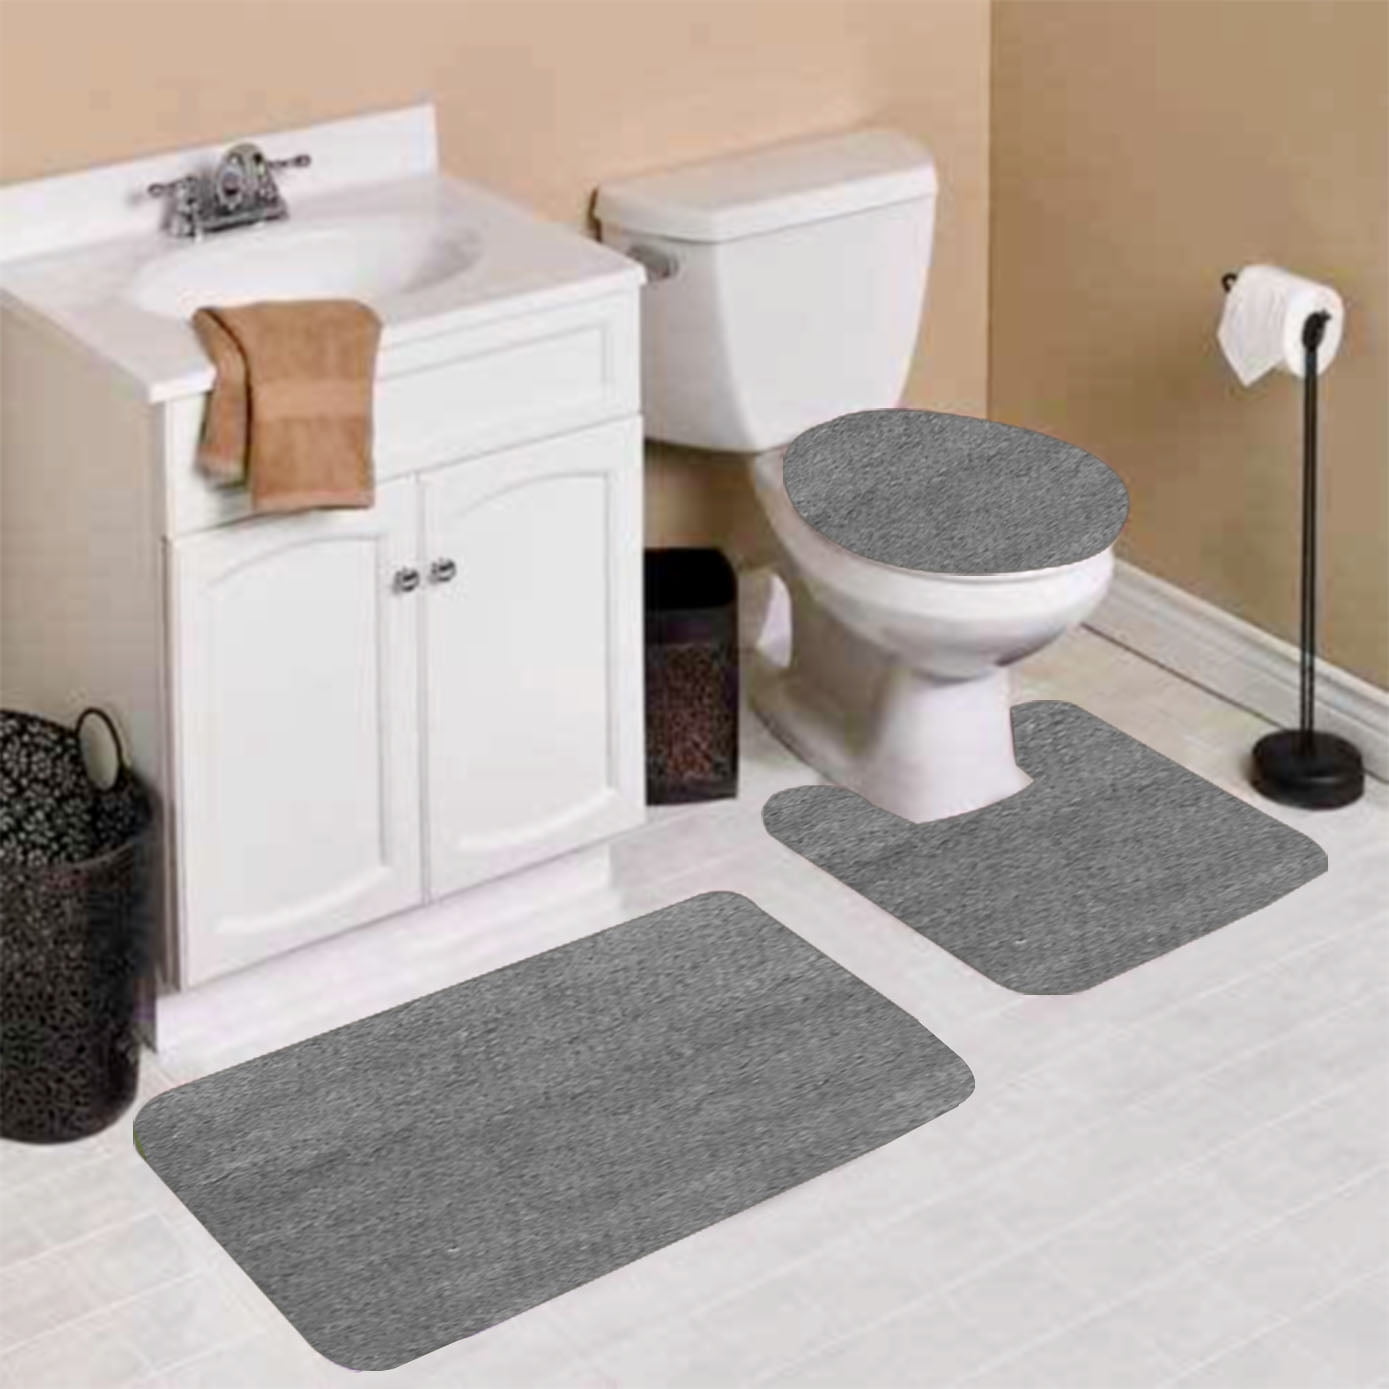 Black/ Grey 2 Piece Toilet Cover Set Rug Mat Bathroom With Rubber Back Anti Slip 